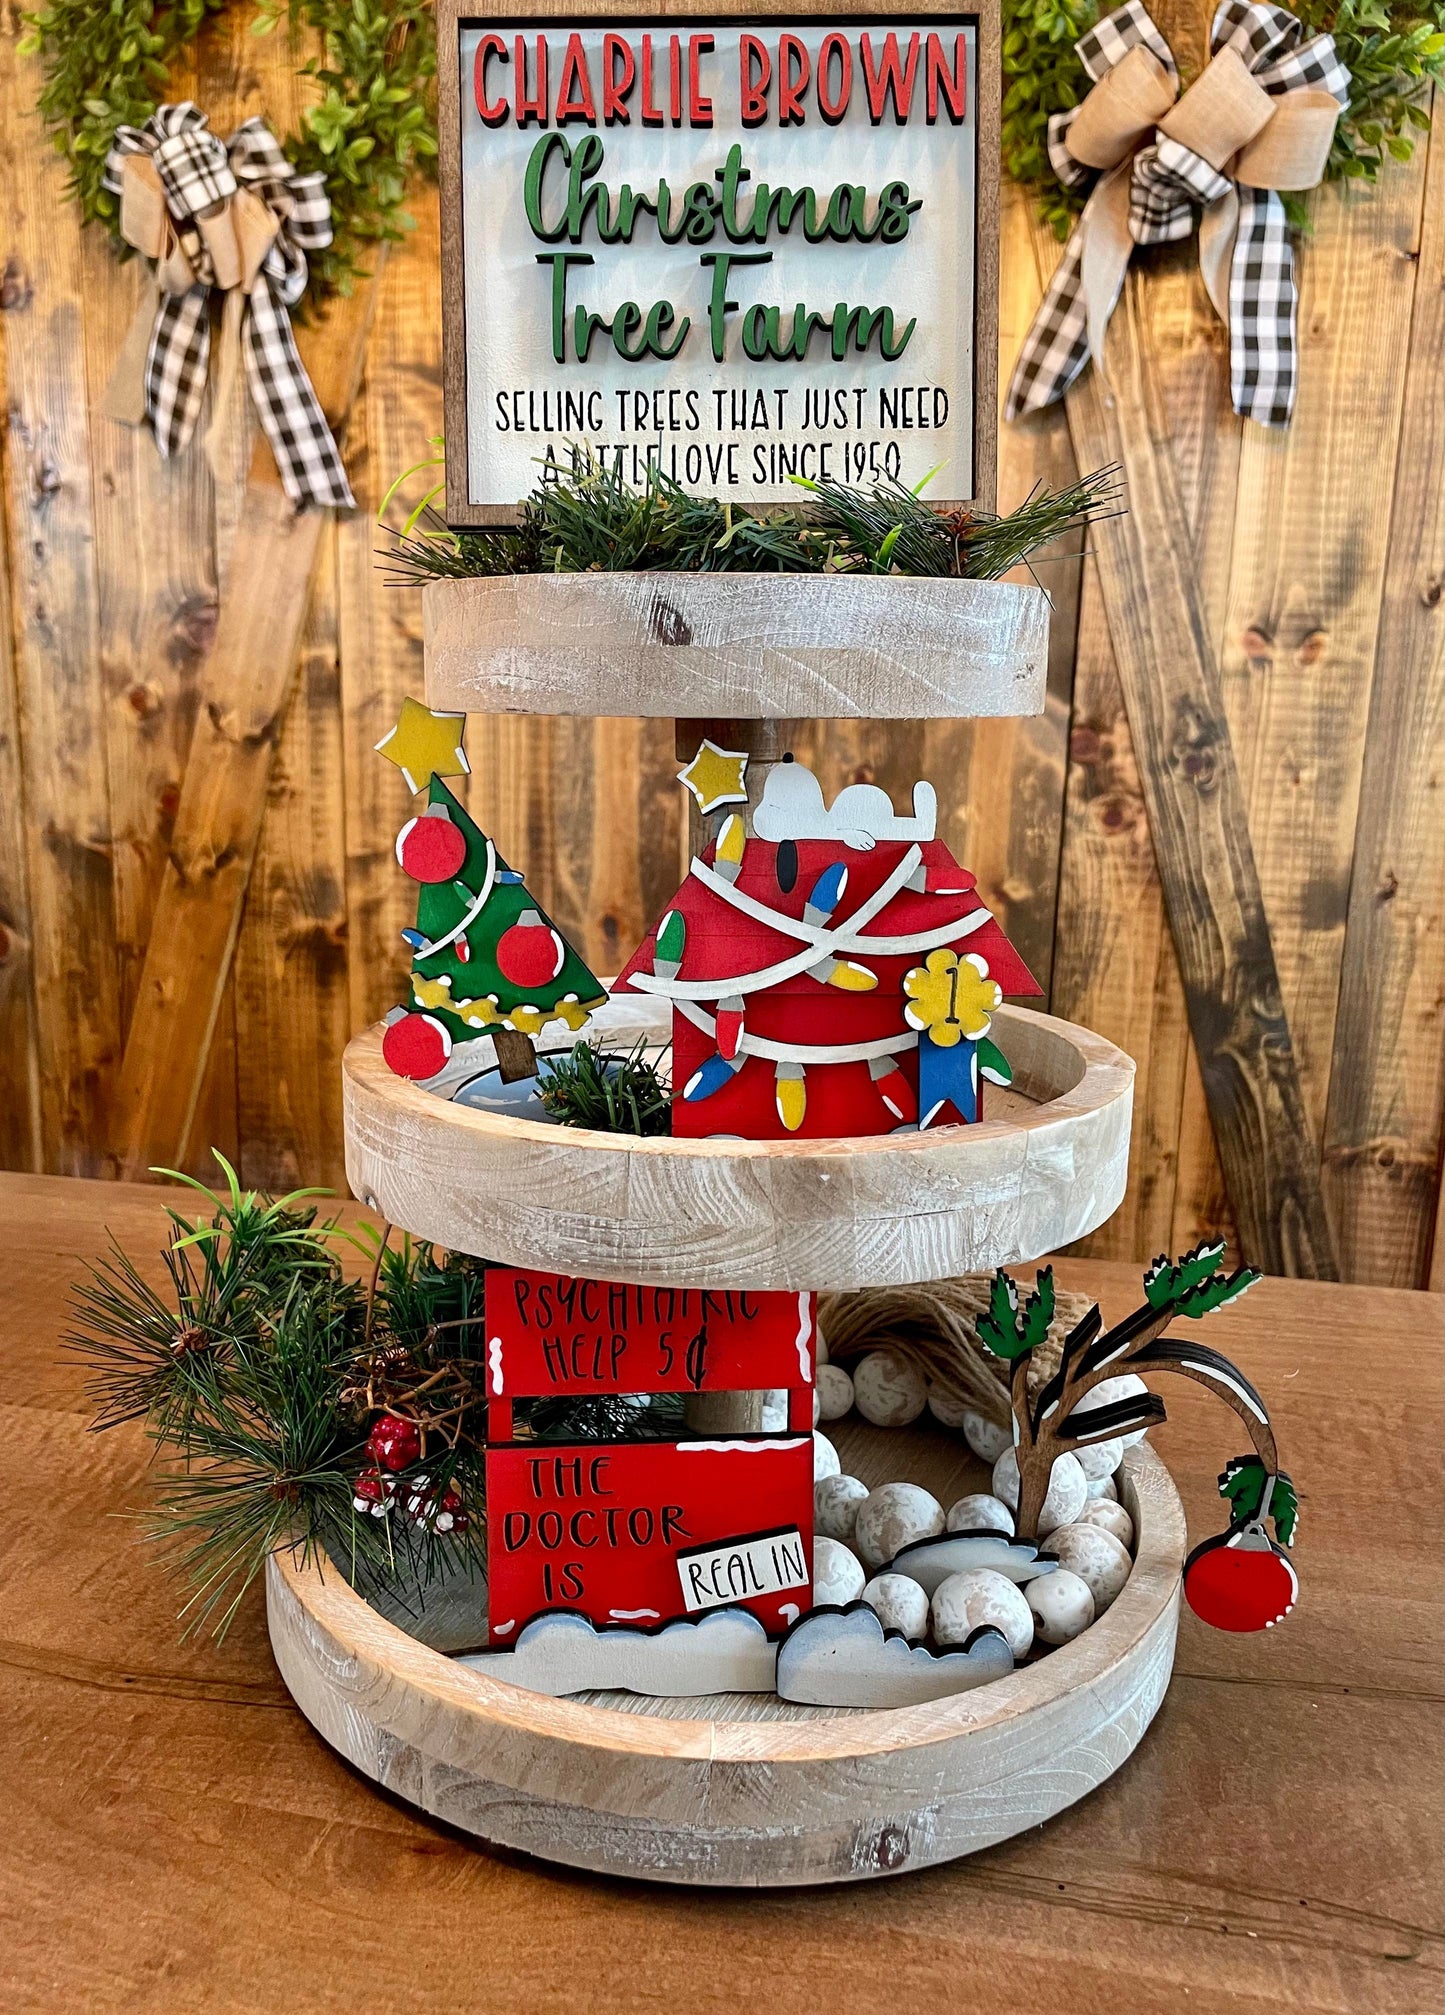 3D Tiered Tray Decor - Charlie Brown Christmas